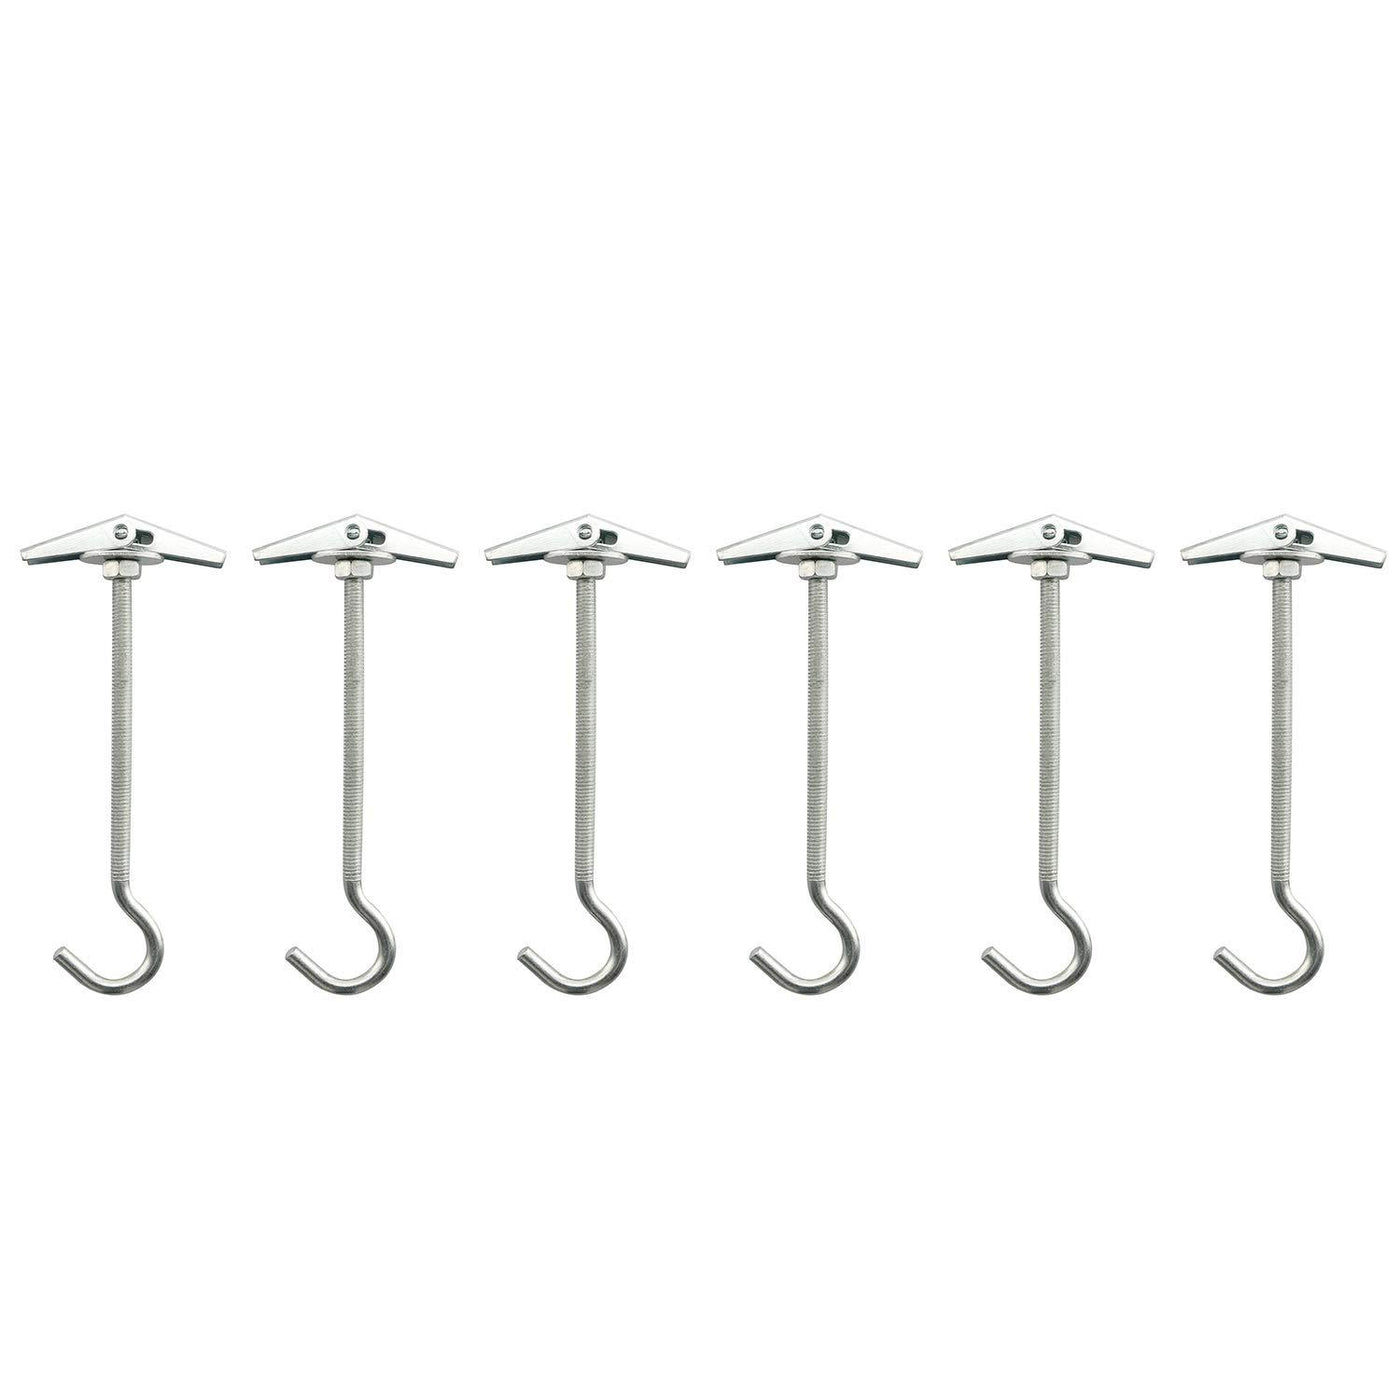 IDEALSV 1-1/4 Screw Ceiling Hooks Stainless Steel Cup Hooks 1-1/4 Inch  Screw-in Lights Hooks Plants Hanger Hooks Outdoor and Indoor Hanging (40  Pack)